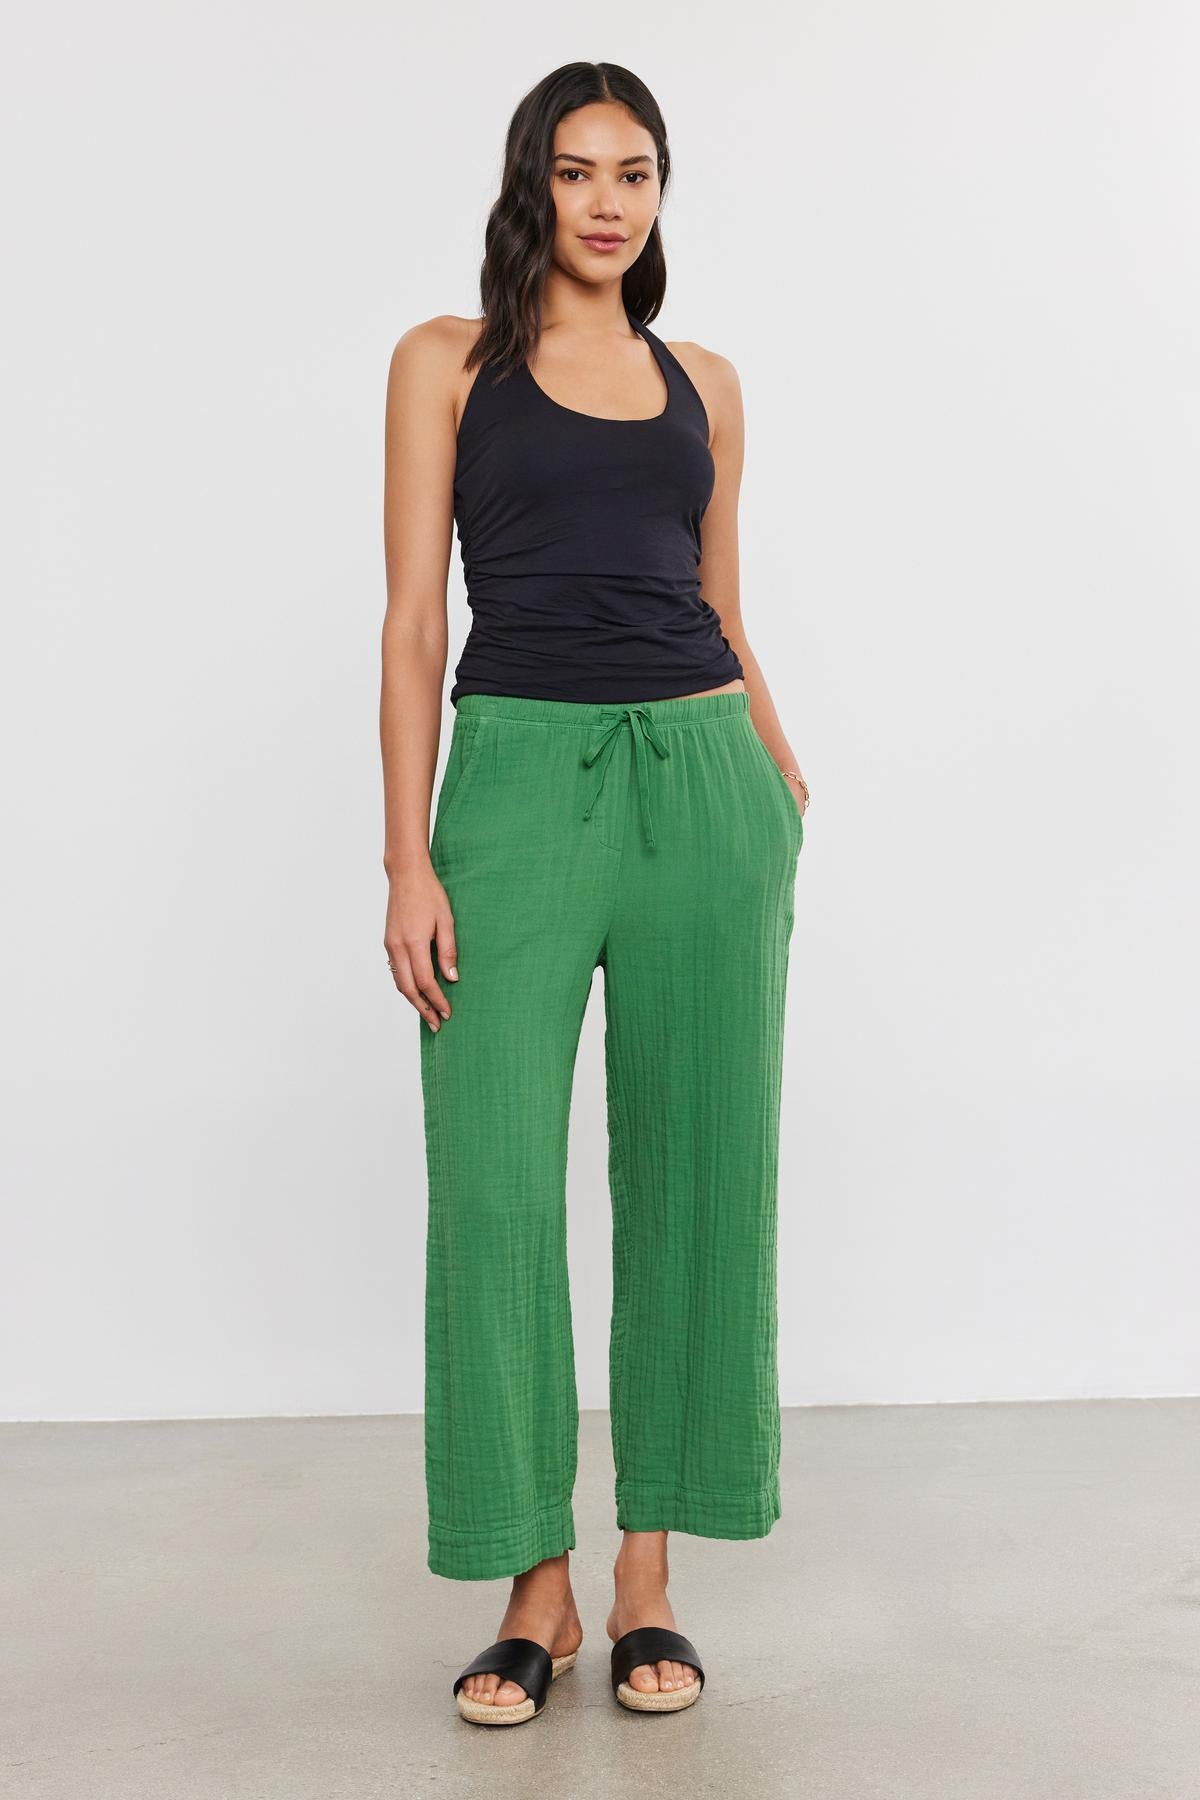 A woman stands against a plain background, wearing a black WHITLEY TANK TOP by Velvet by Graham & Spencer, green loose-fit pants, and black sandals. Her hands are in her pockets.-37402895319233